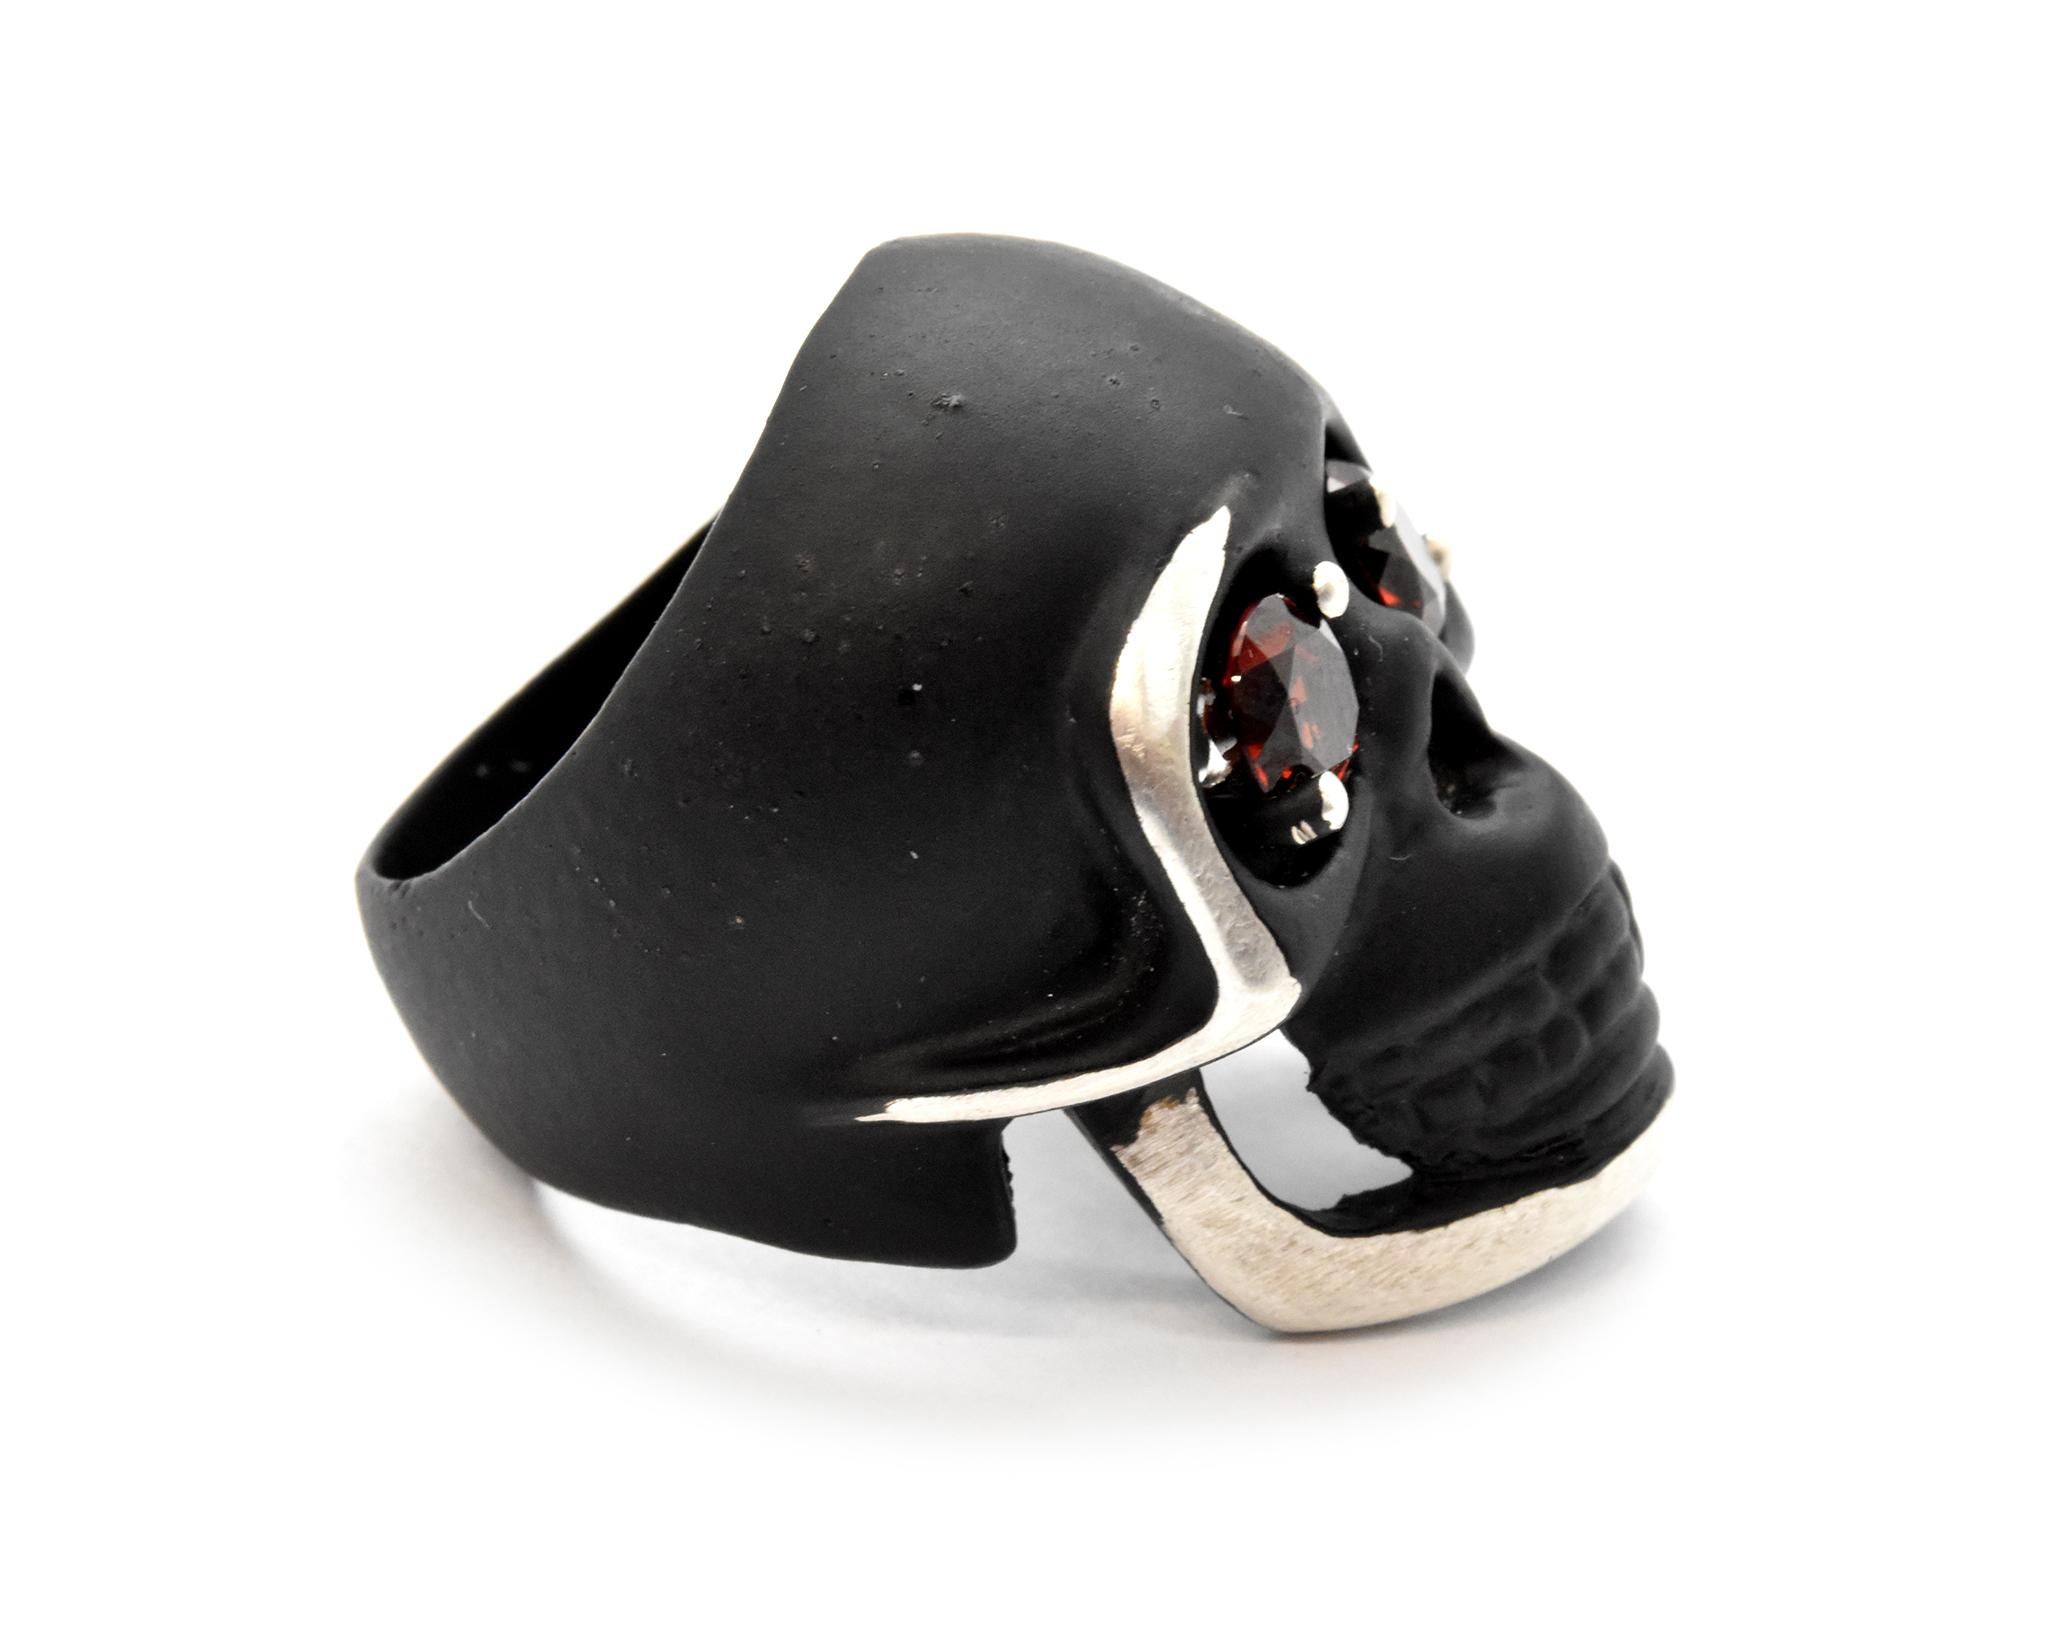 This is a sterling silver skull ring coated in black and set with garnet in each of the eyes. Each garnet is held in place by two prongs, each garnet measures 5.48mm. Ring size is 7 and total weight is 18.45 grams.